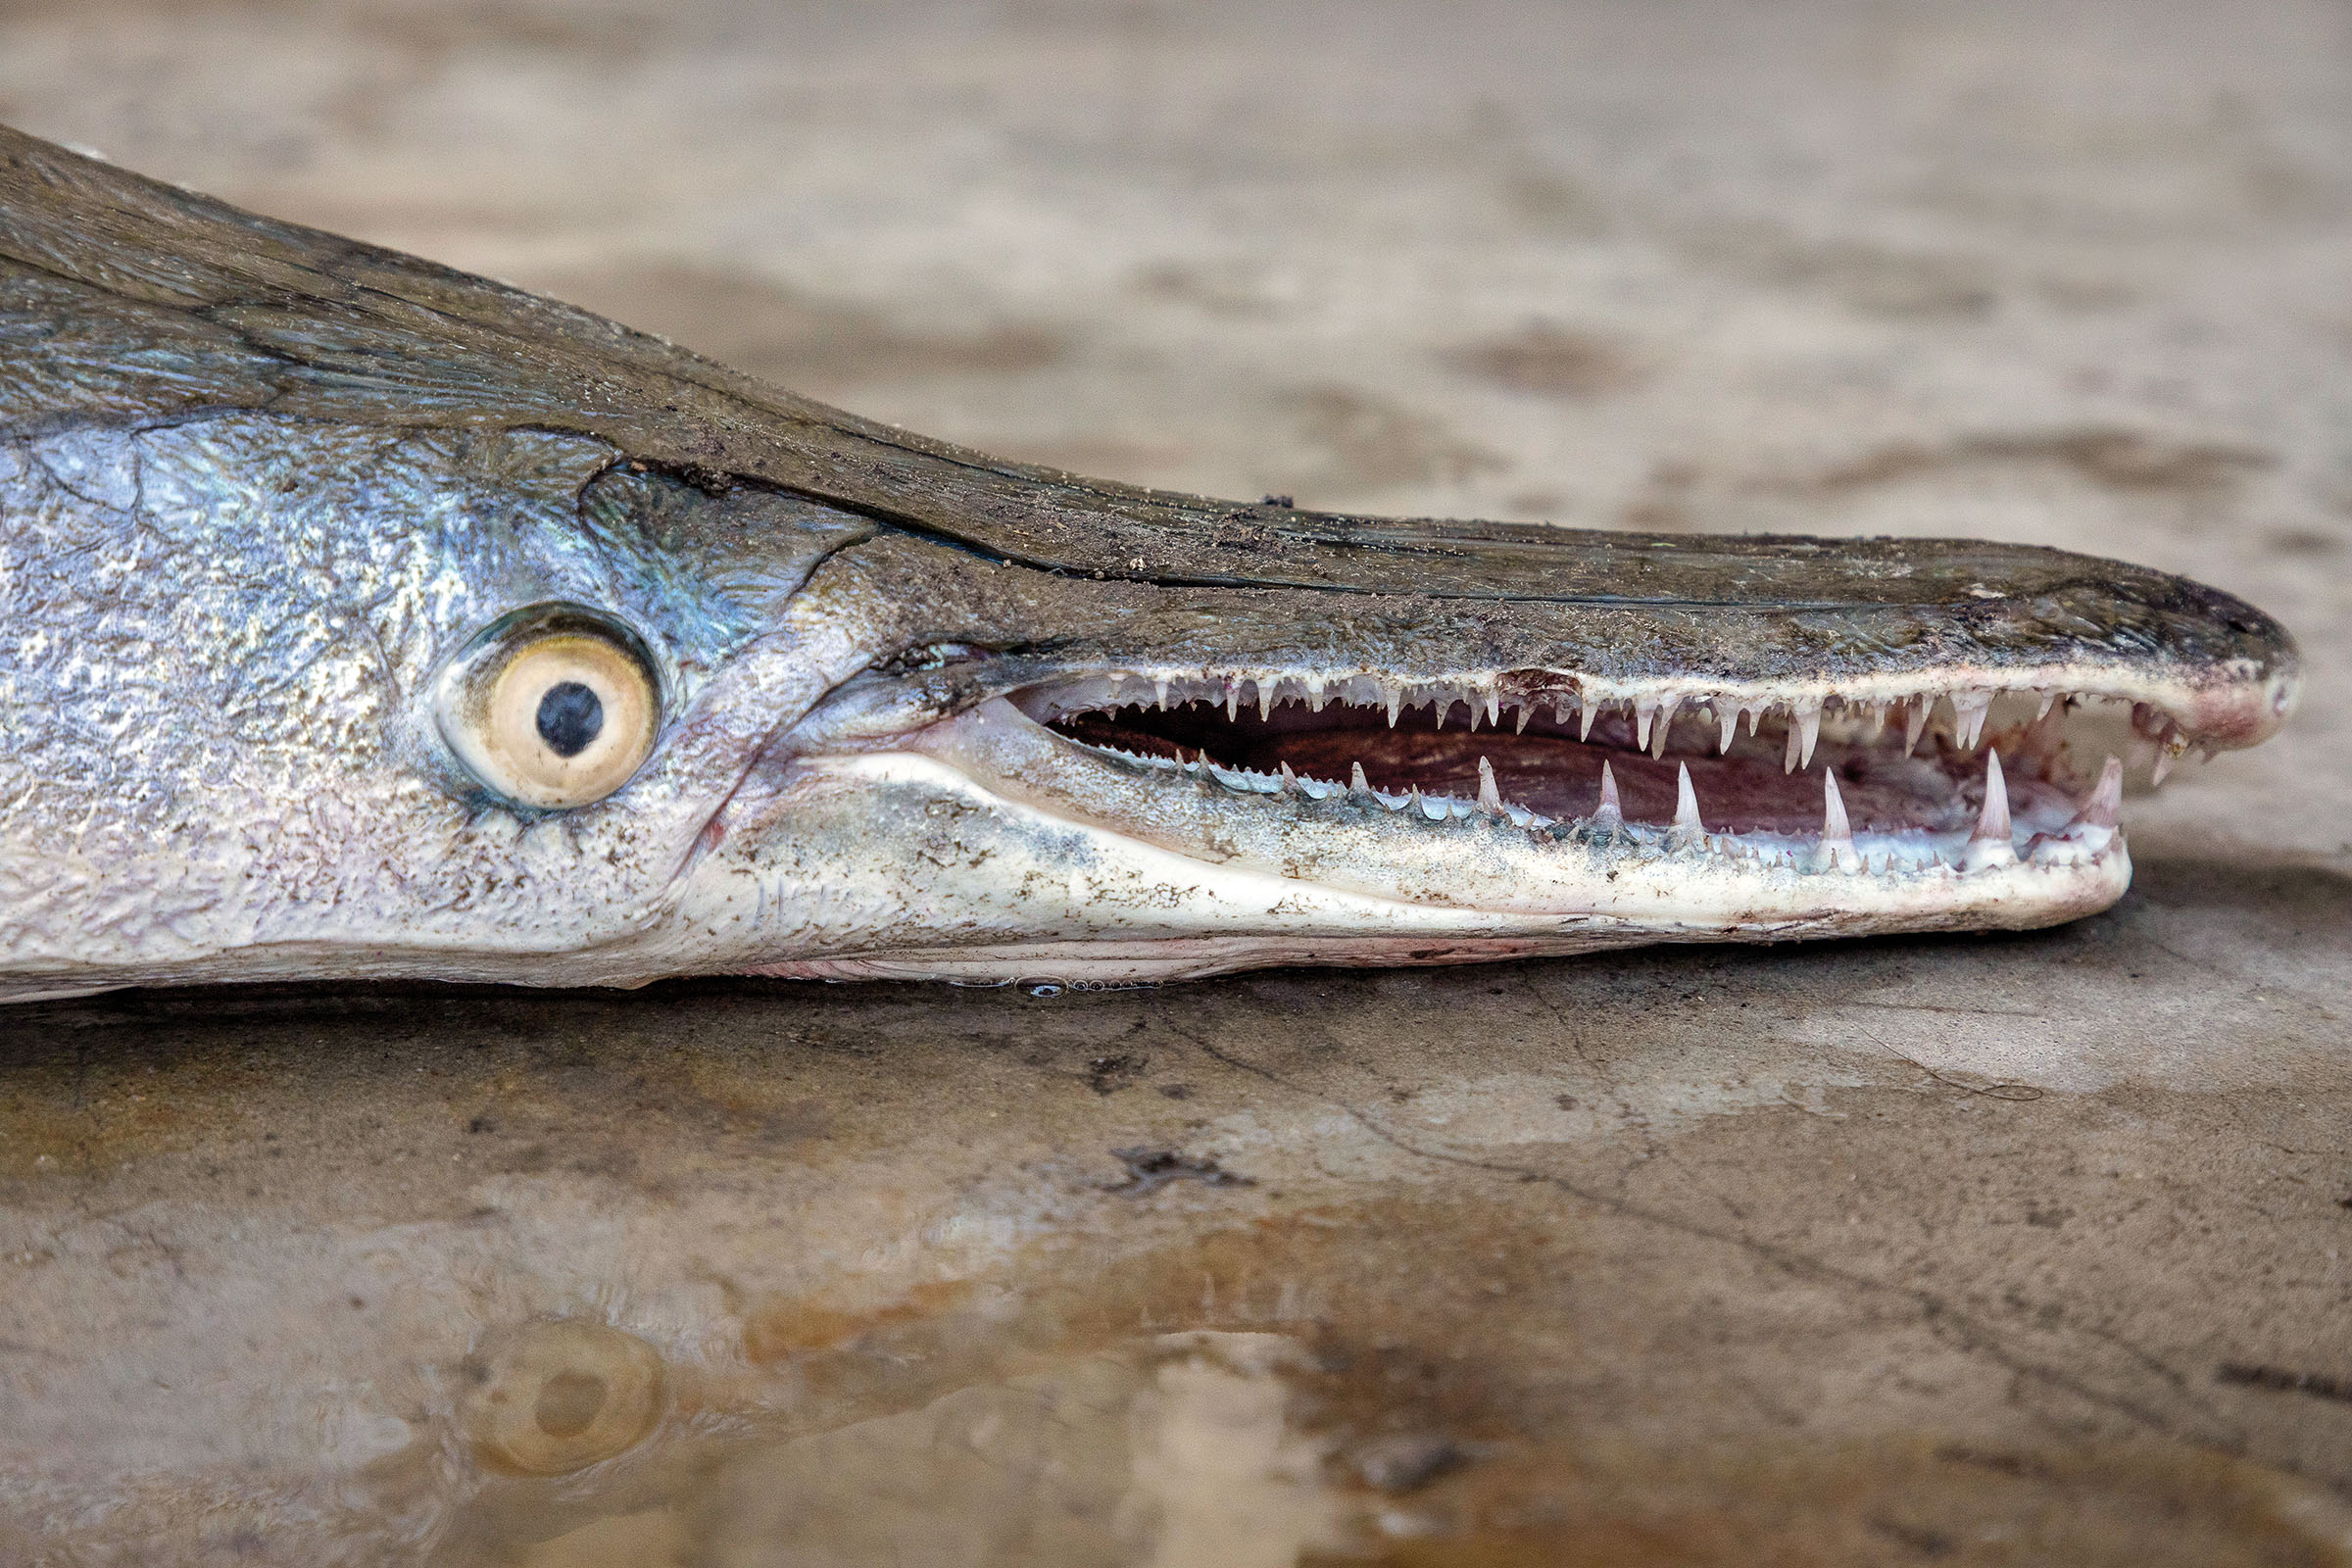 A silver fish with a large circular eye and sharp teeth